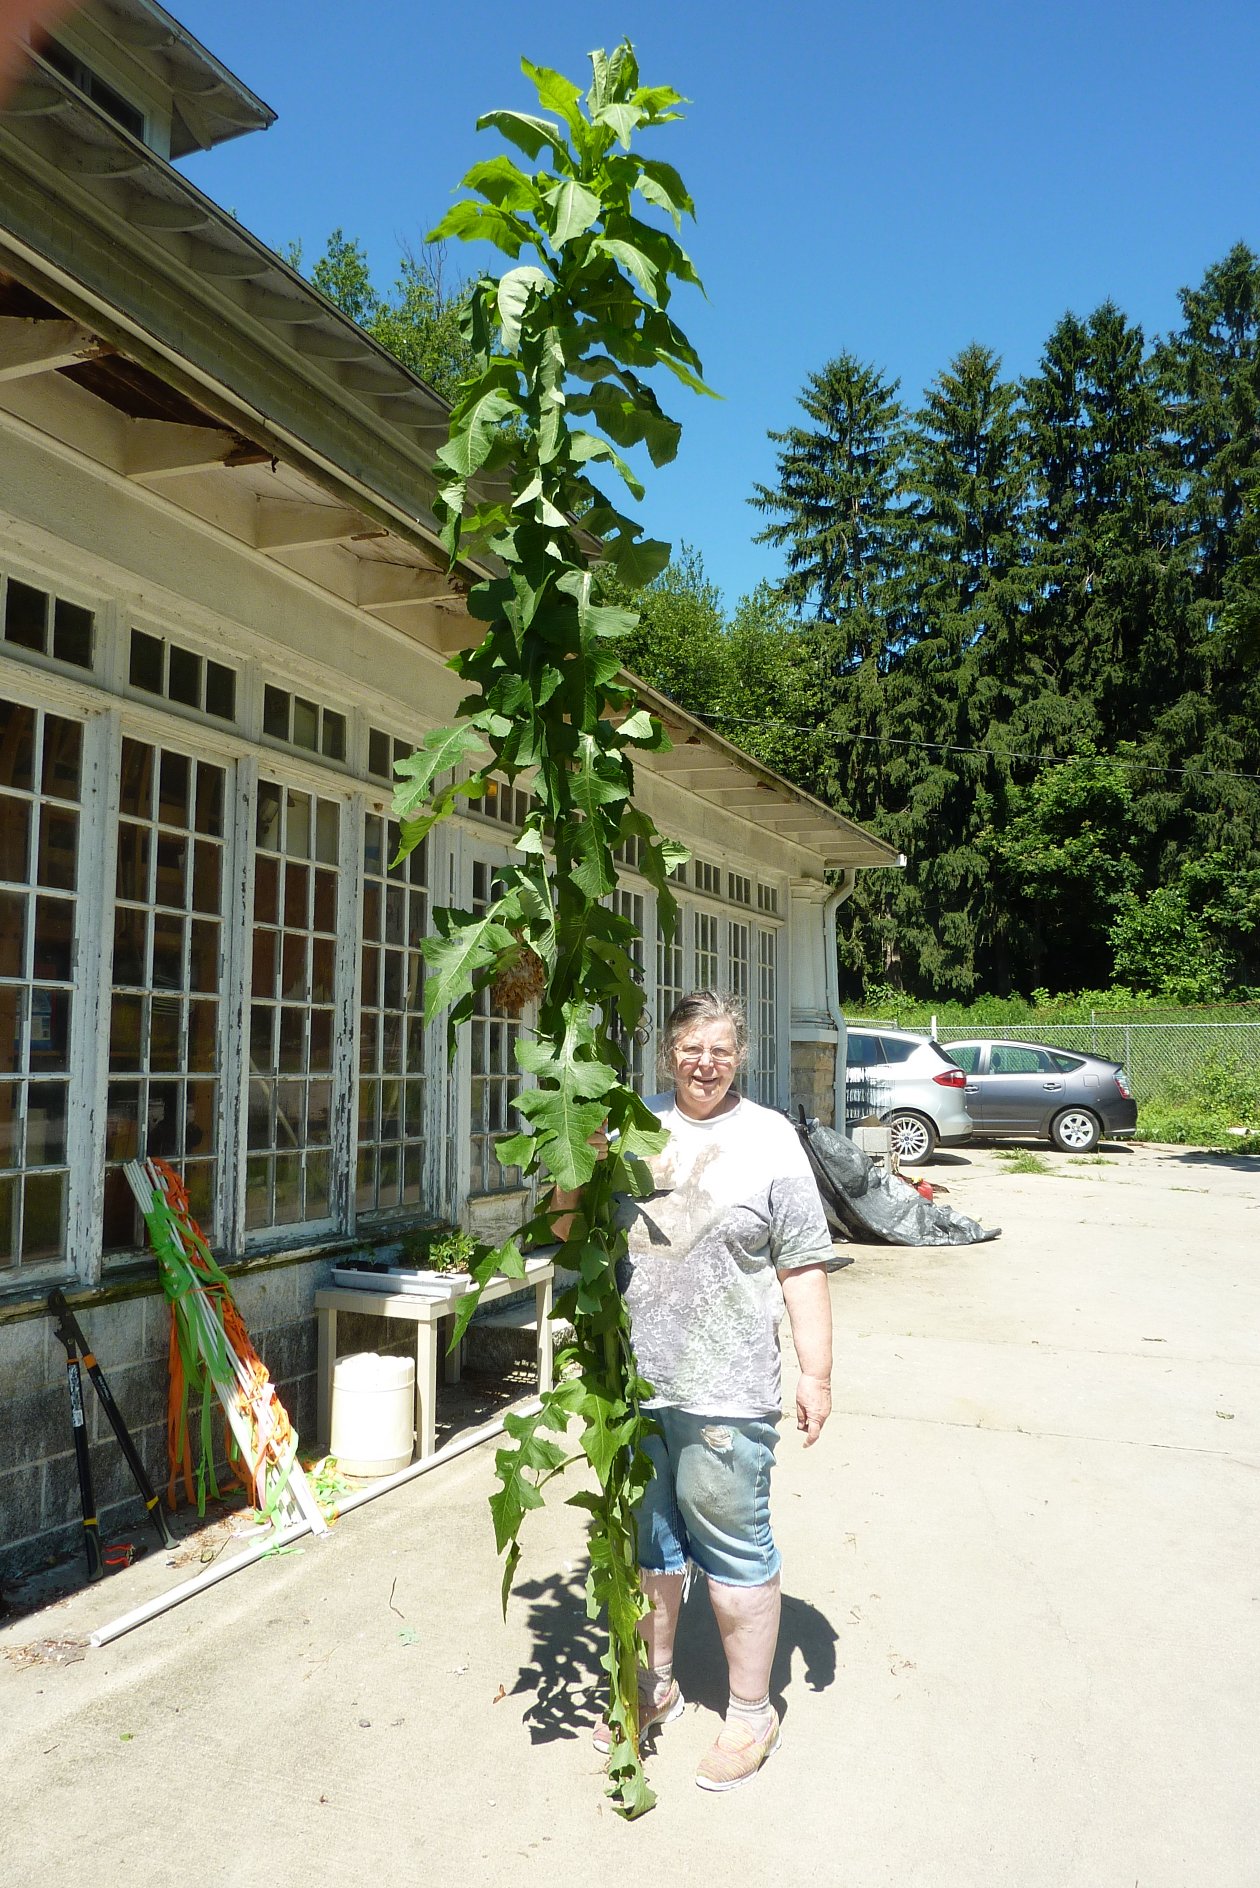 Bonnie with 10 foot high weed 